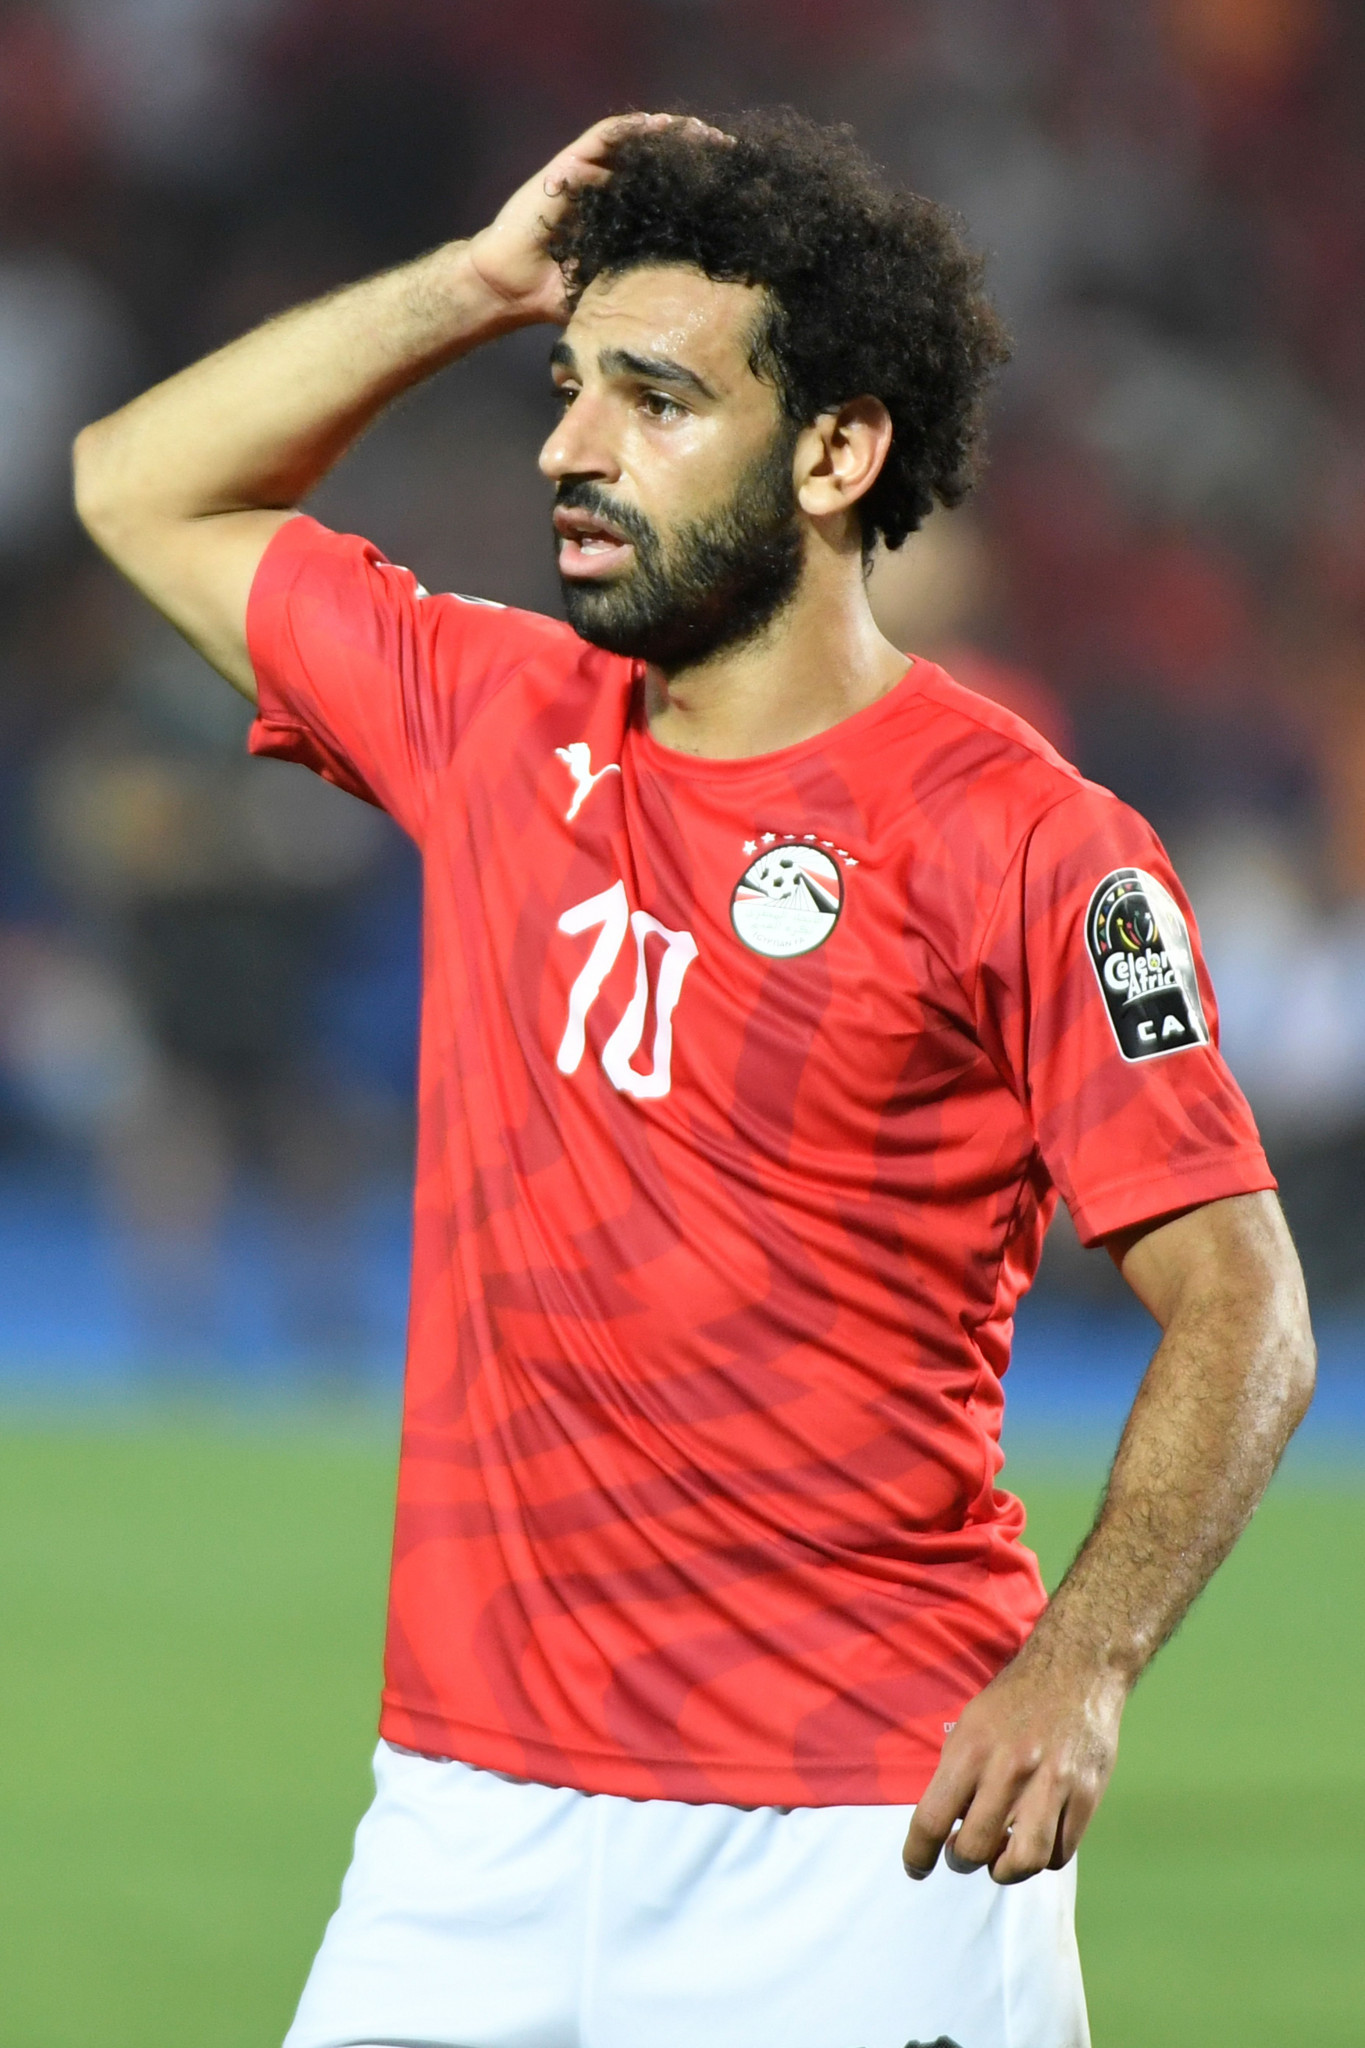 Egypt's Mohamed Salah takes in a shattering defeat after the hosts of the Africa Cup of Nations are beaten 1-0 by South Africa ©Getty Images